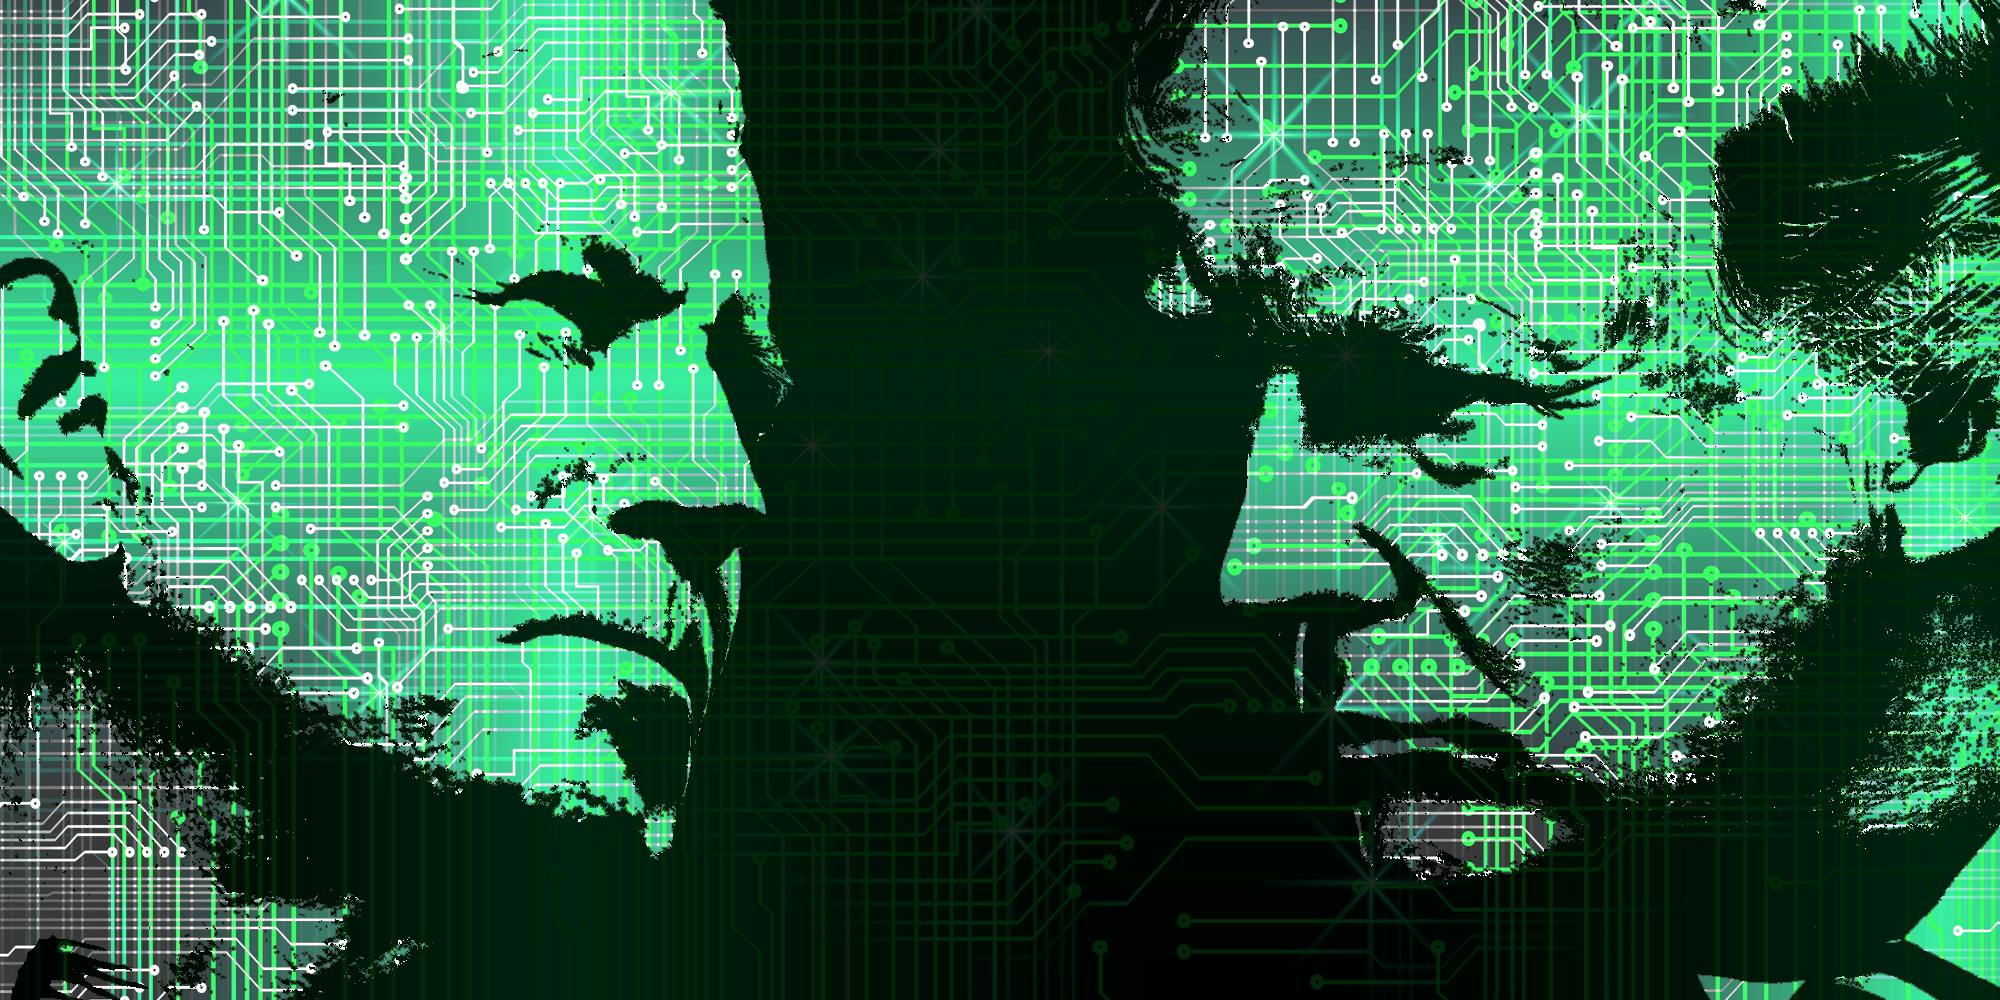 Joe Biden and Donald Trump faces made from circuit board imagery